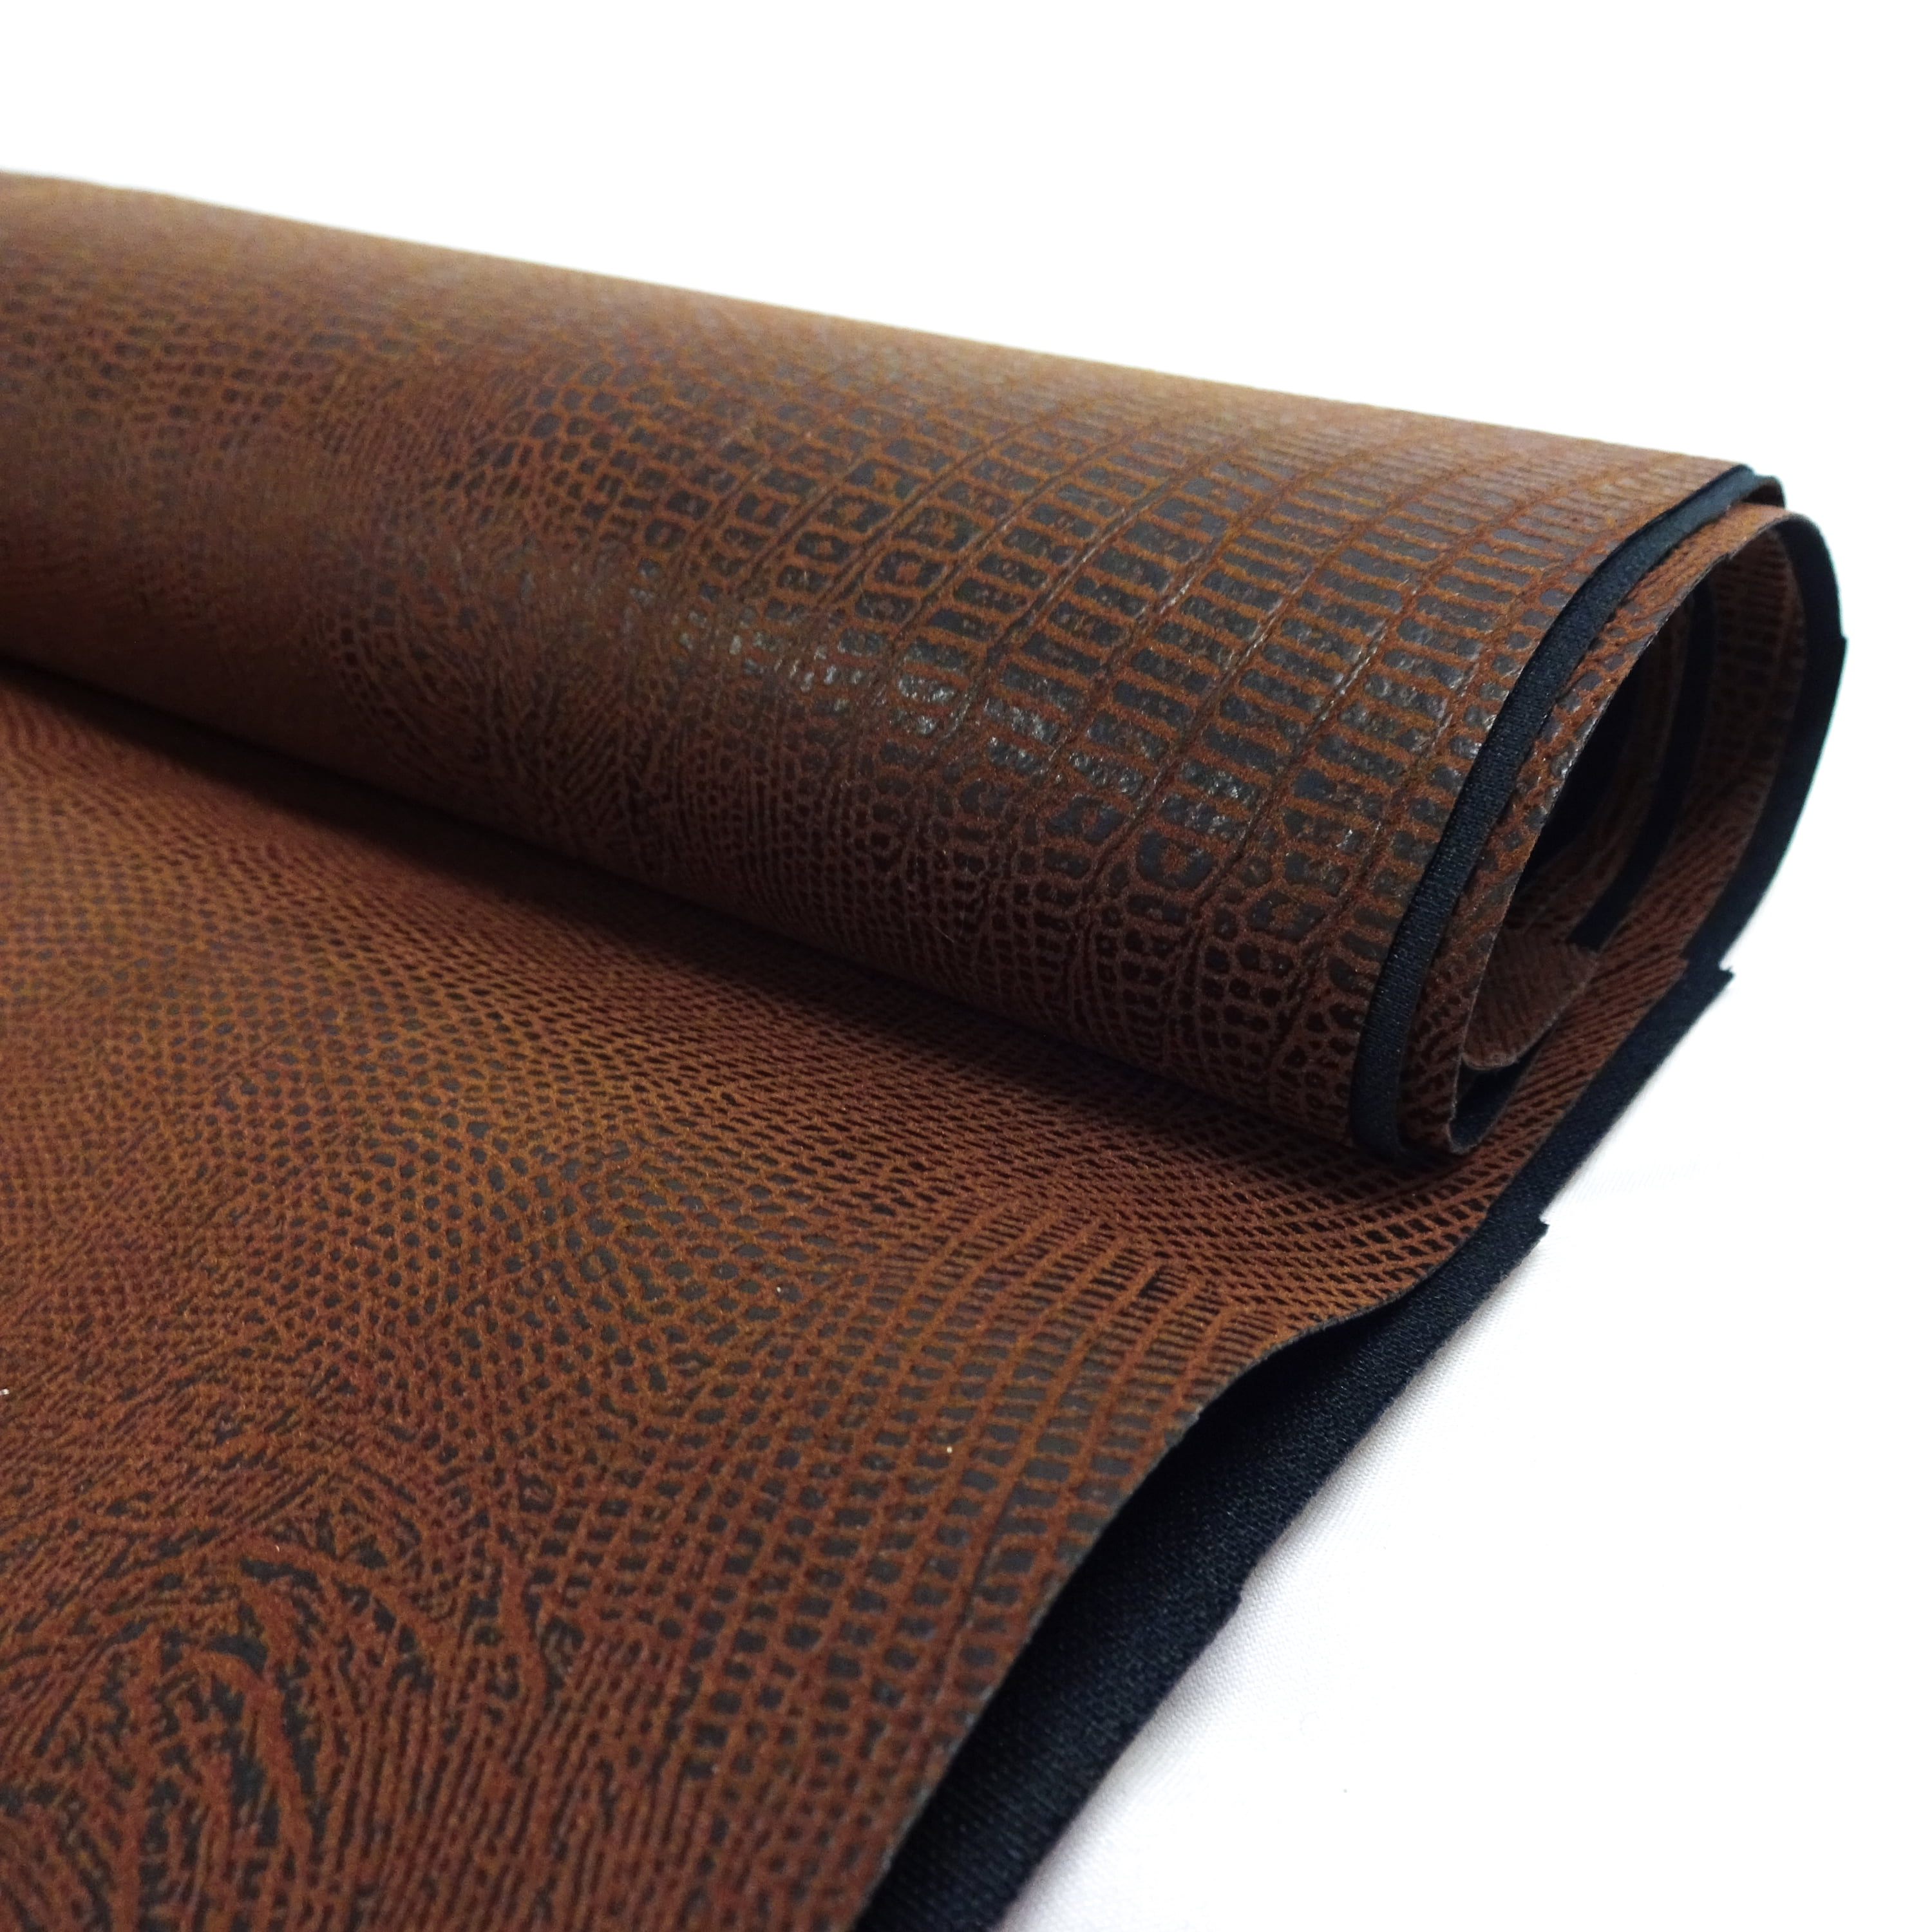 Mottled Brown Felt-Backed Faux Leather Vinyl Fabric | Upholstery / Bag  Making | 54 Wide | By the Yard